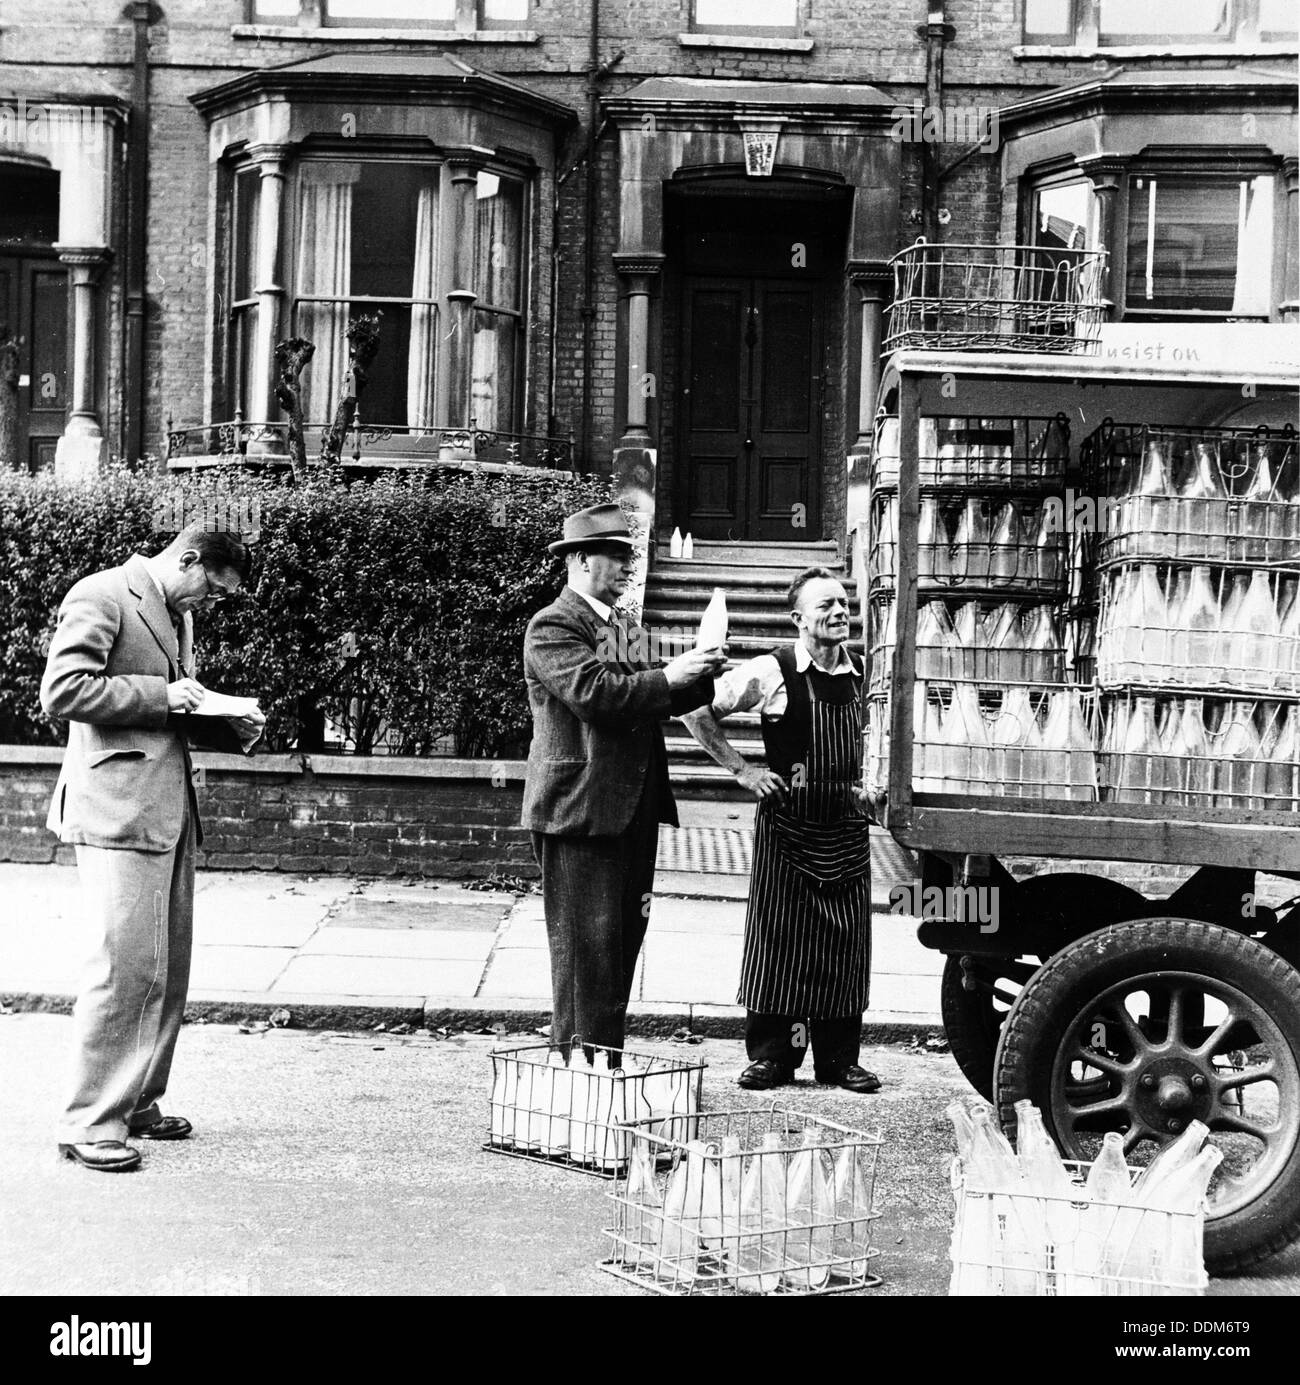 A milkman on his rounds in London, c1950s. Artist: Henry Grant Stock Photo